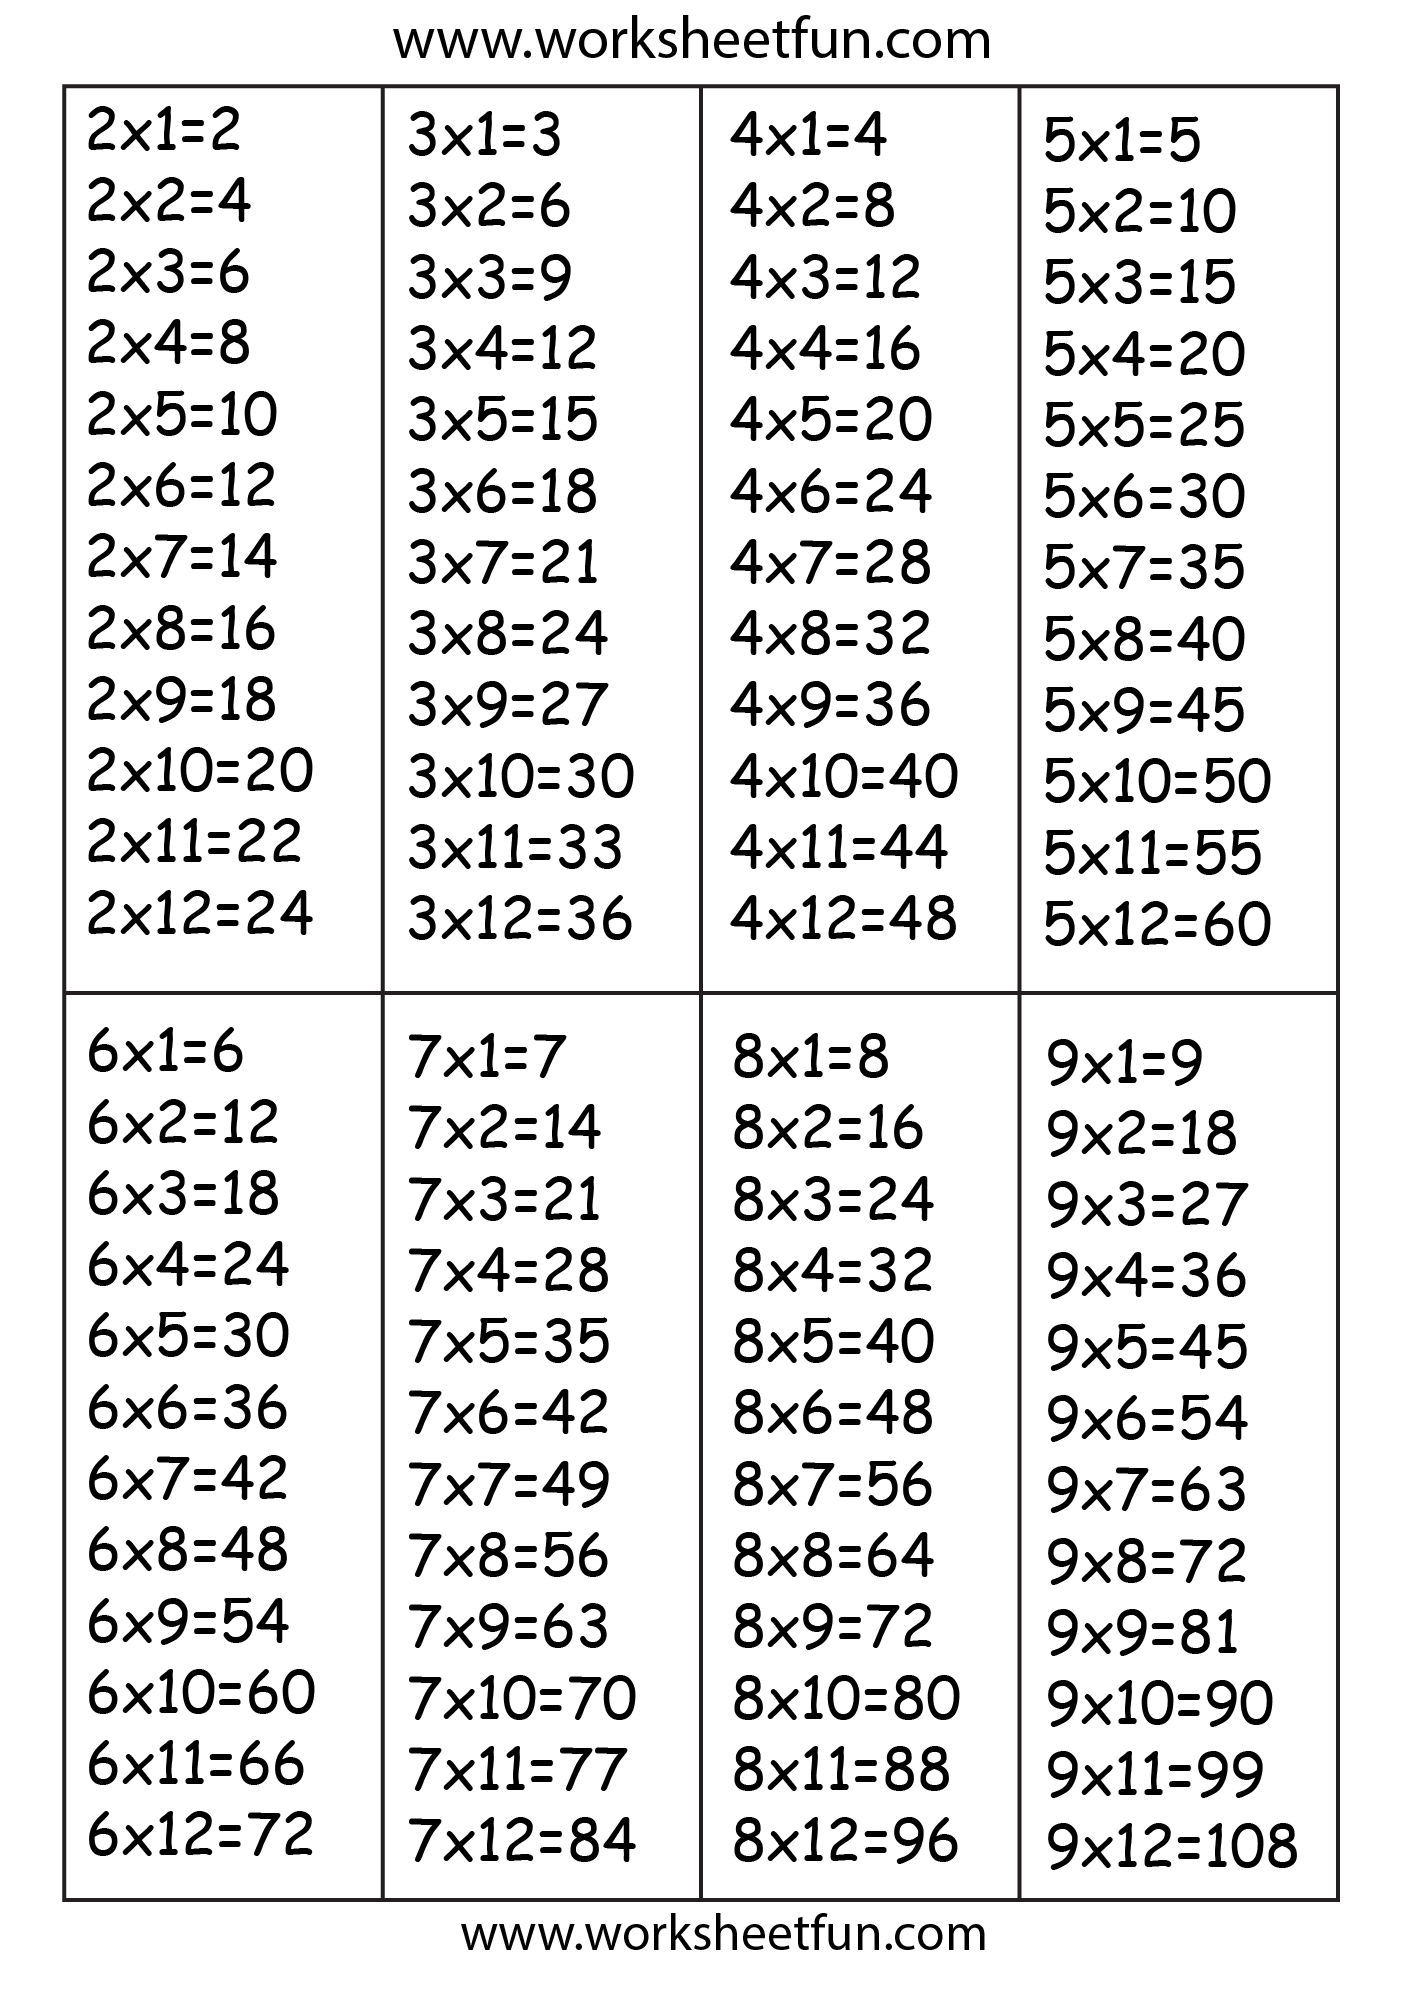 Times Table Chart | Times Table Chart, Multiplication Chart regarding Printable 15X15 Multiplication Chart